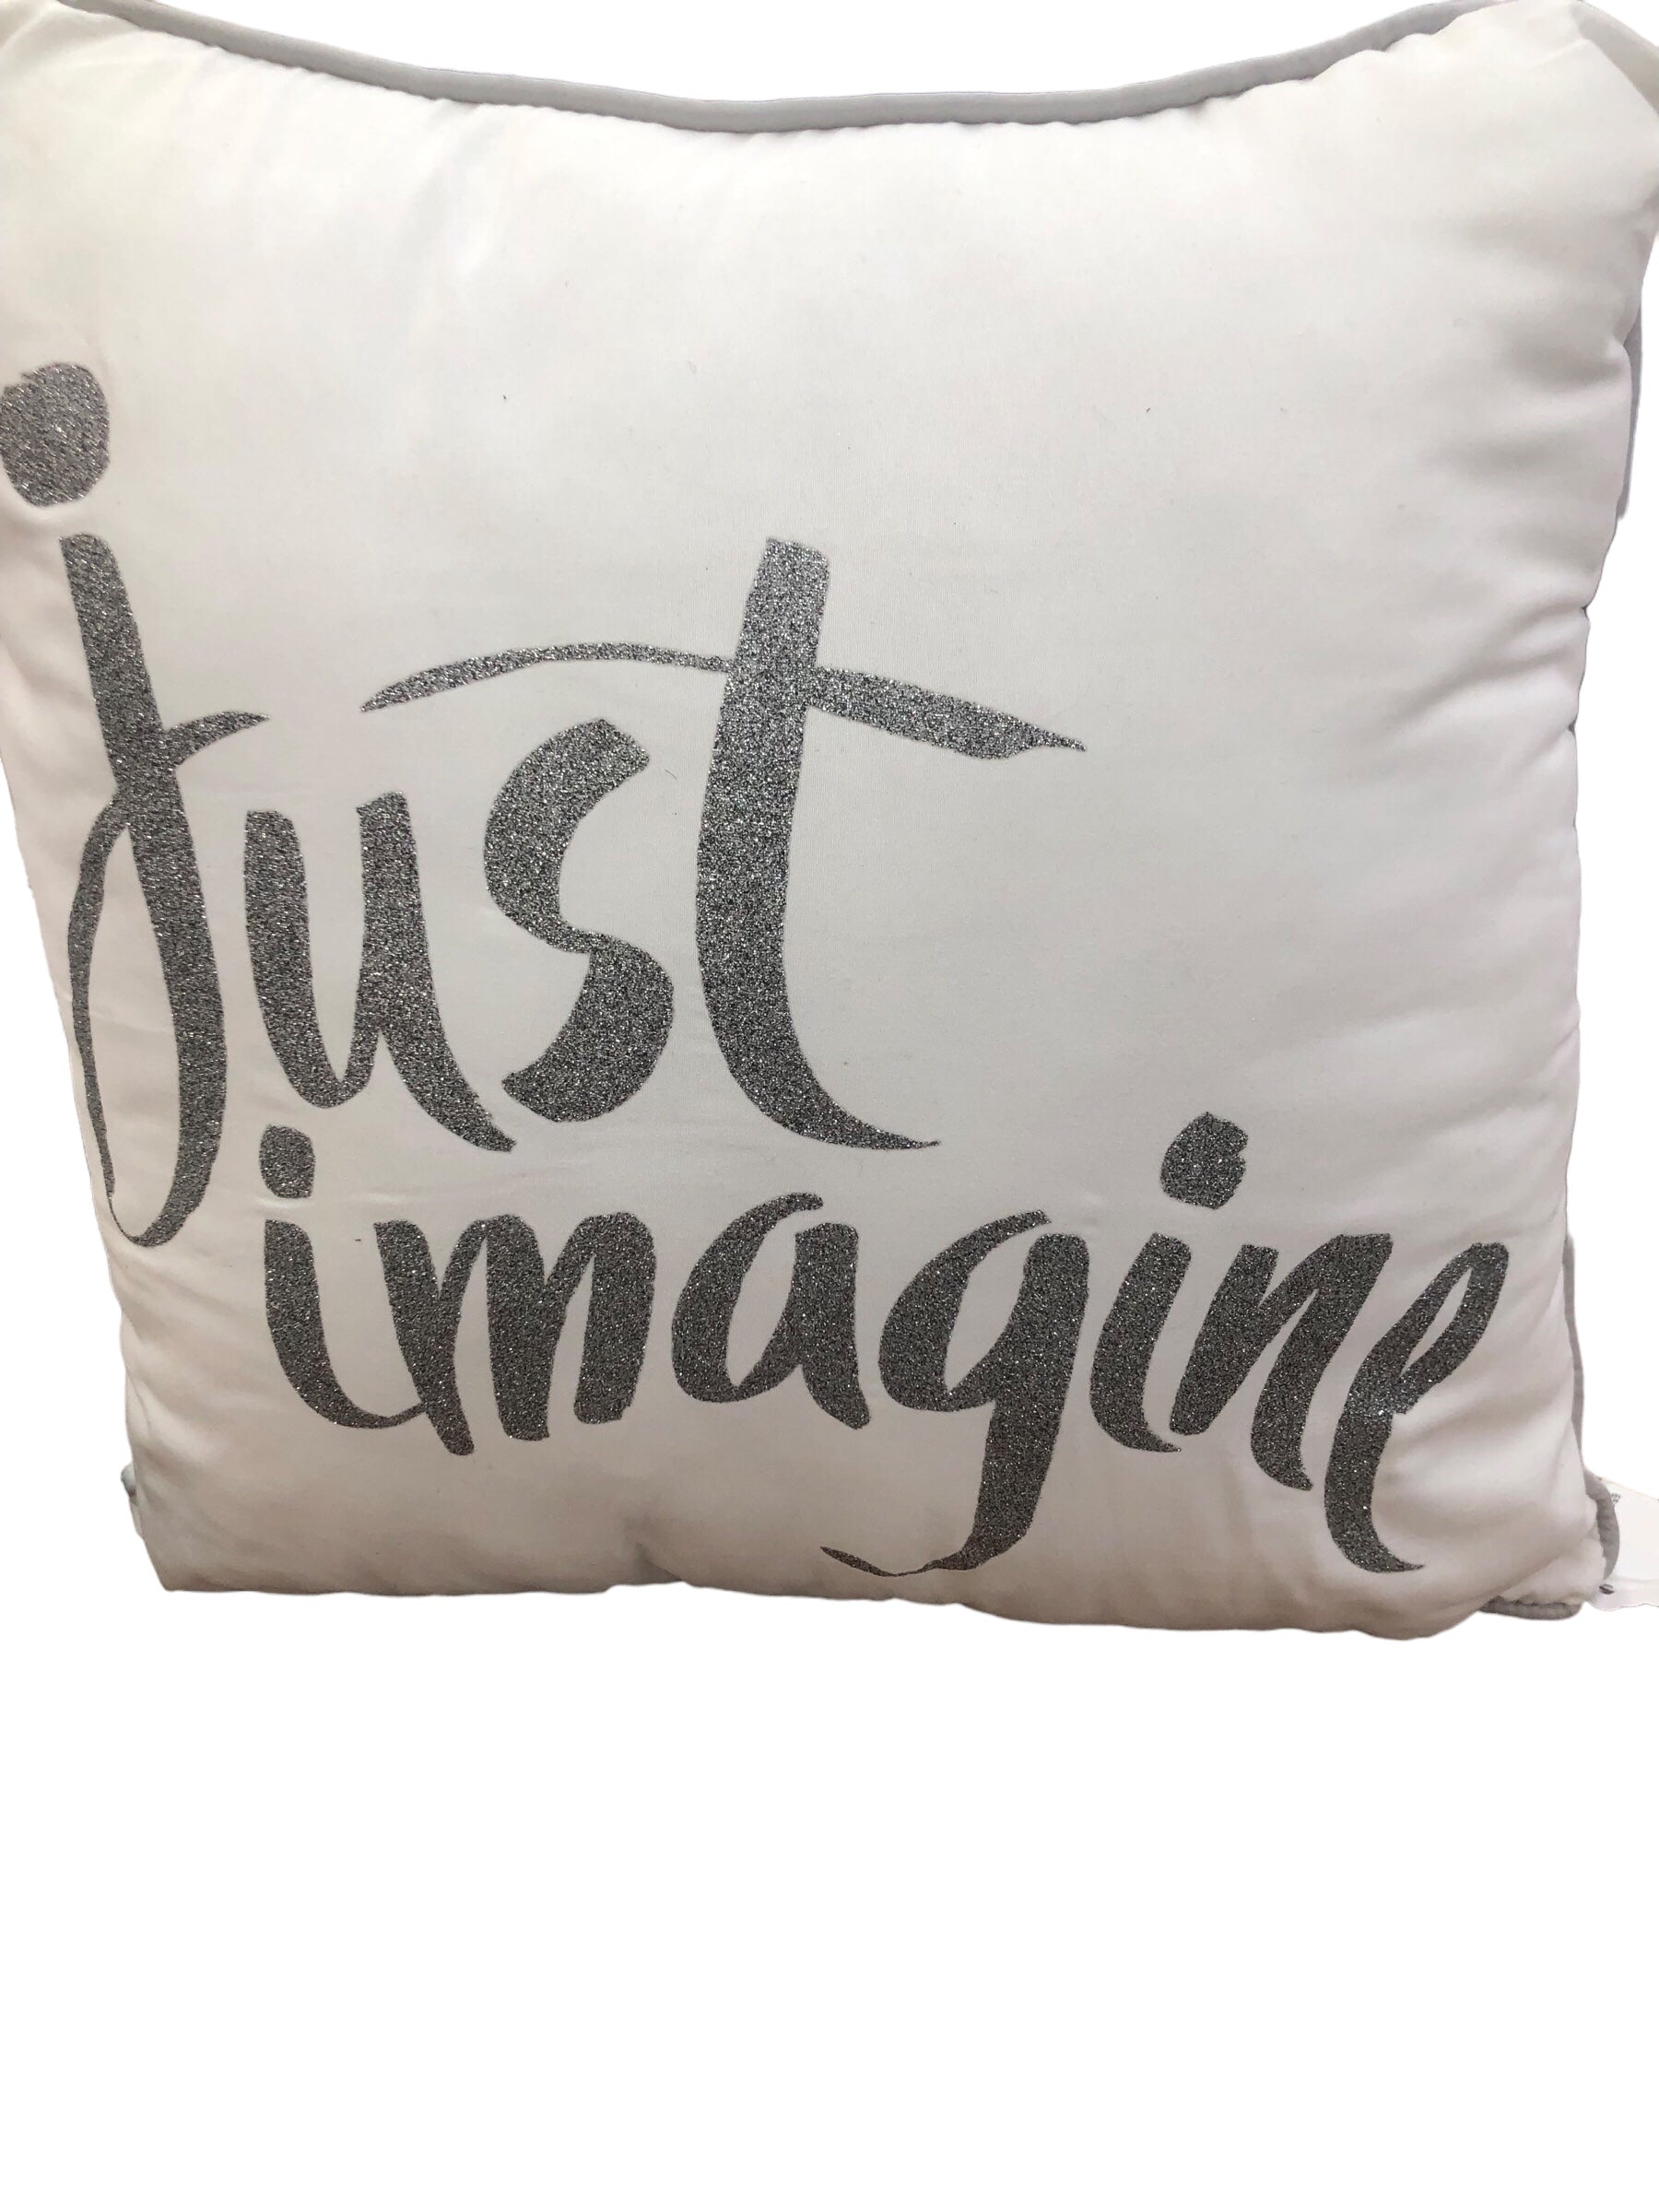 Just Imagine Pillow (White/silver spakle)